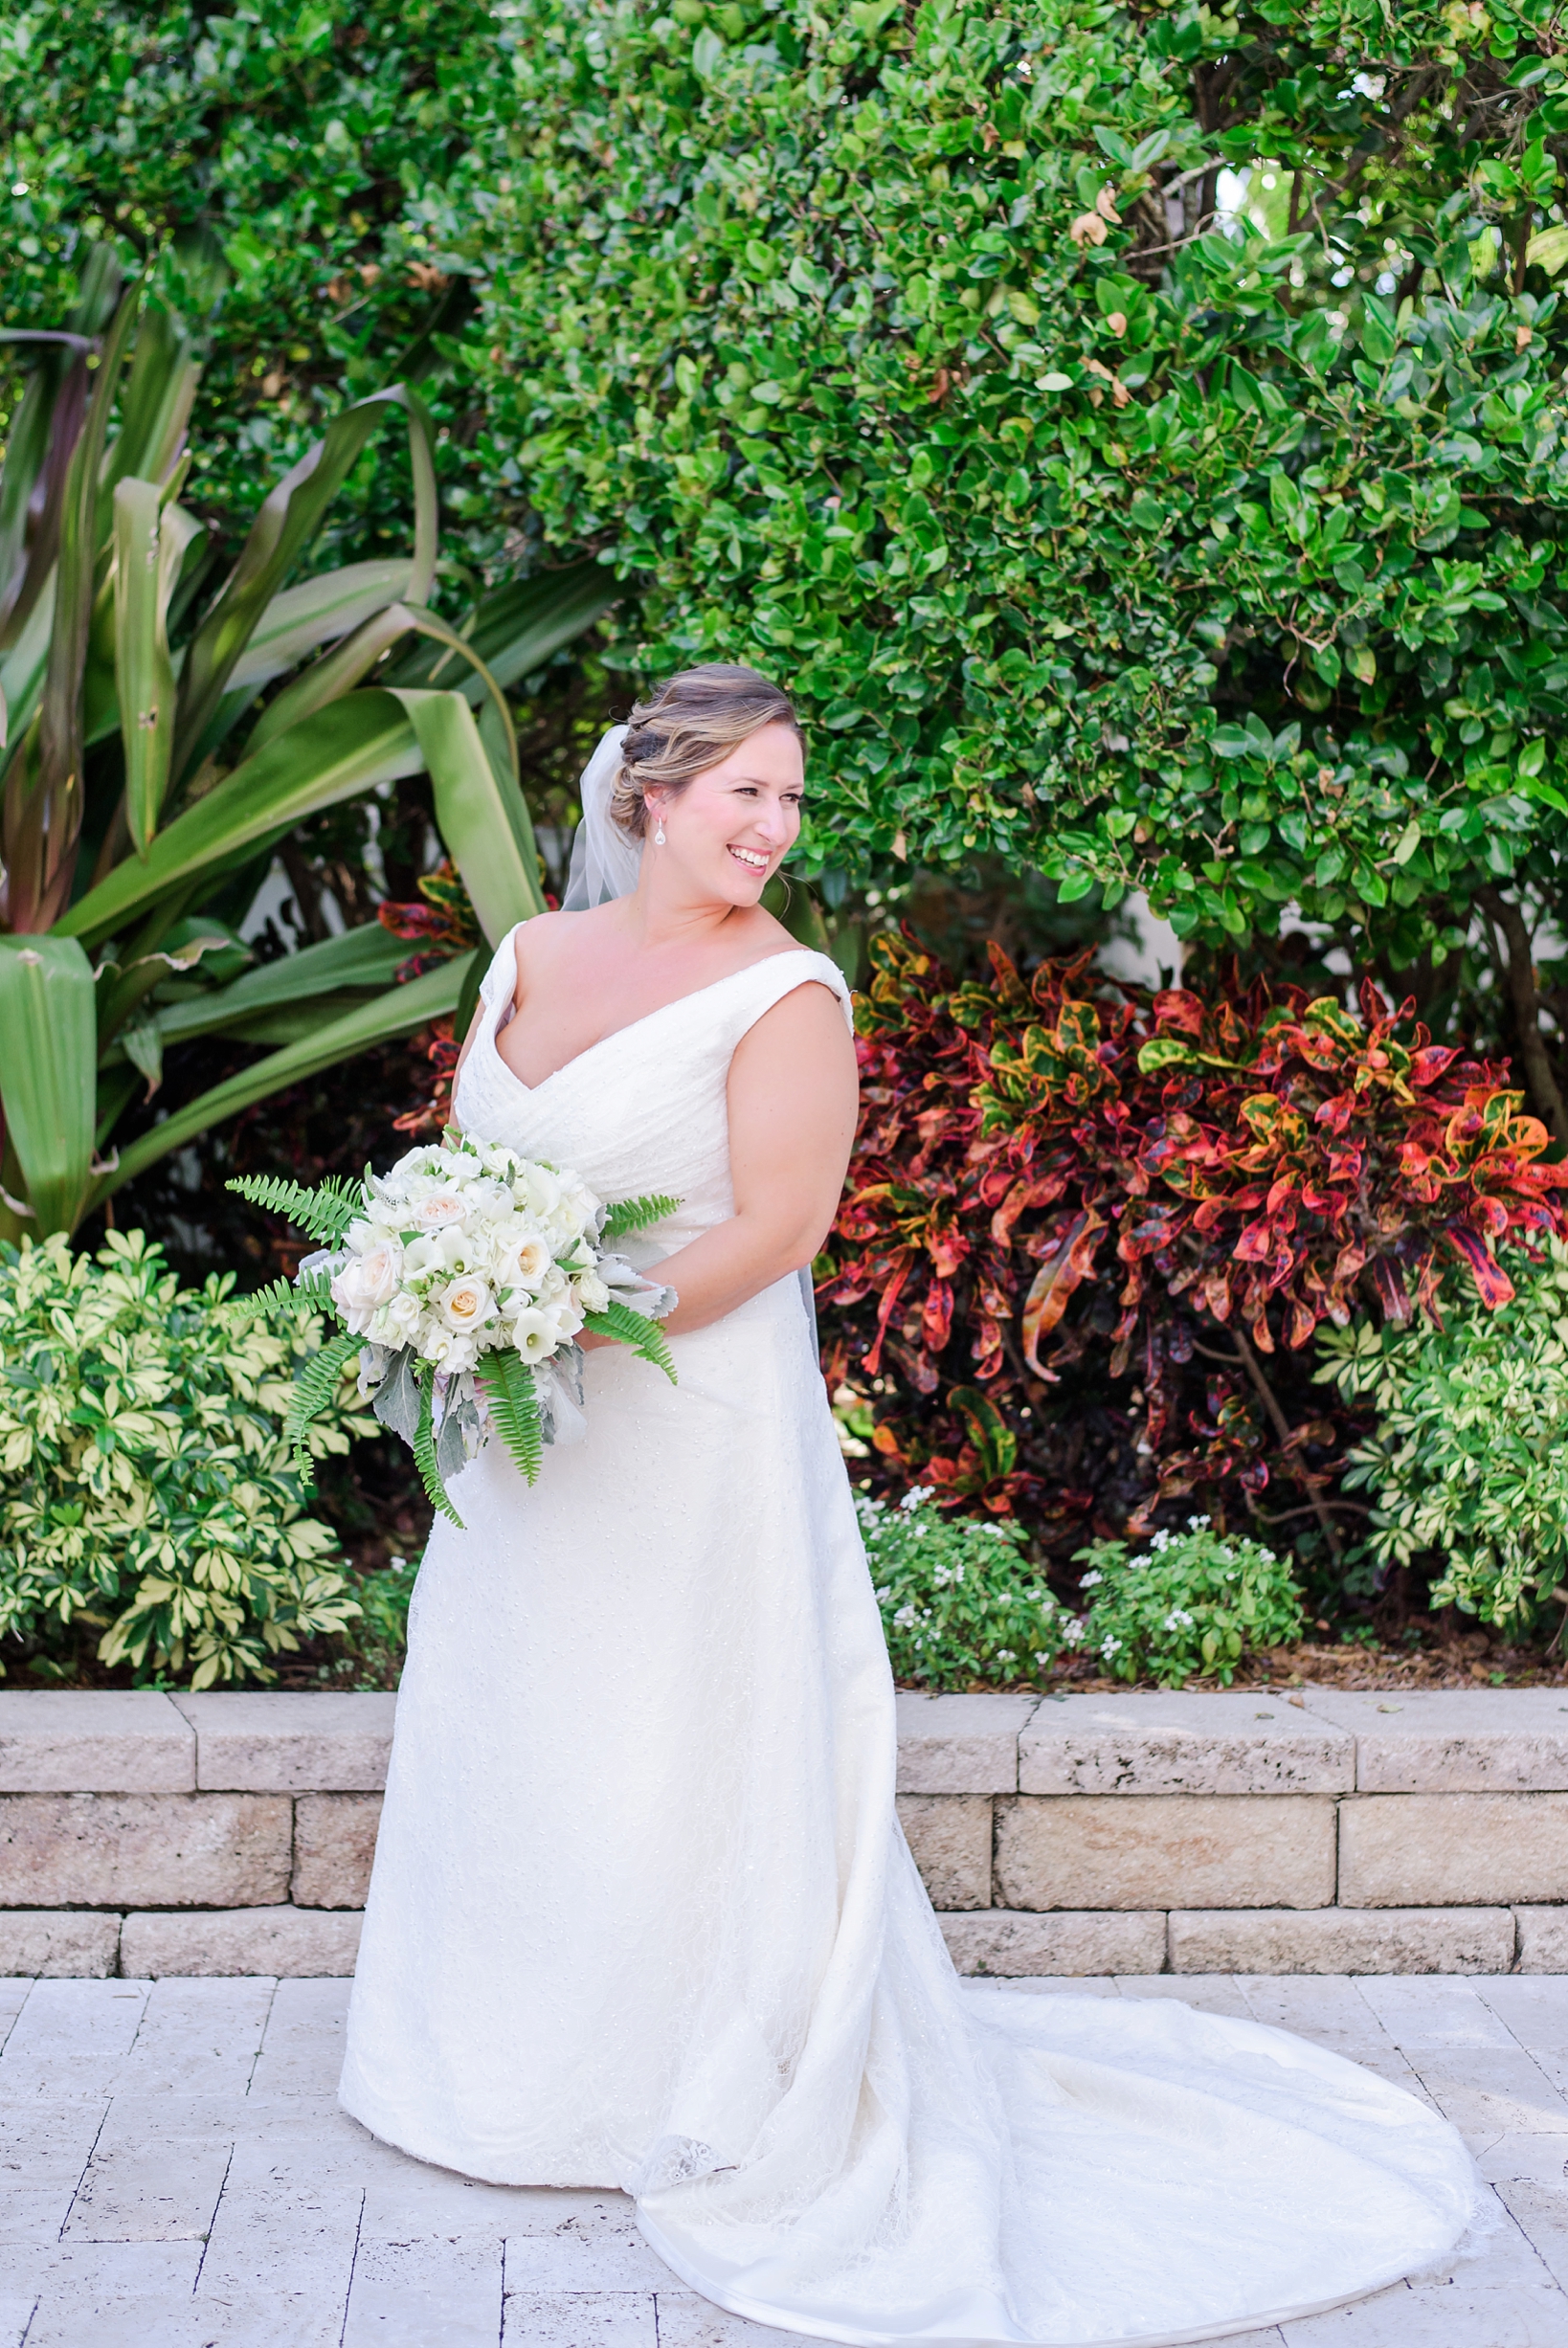 The bride holding her flower bouquet in front of some shrubberies 